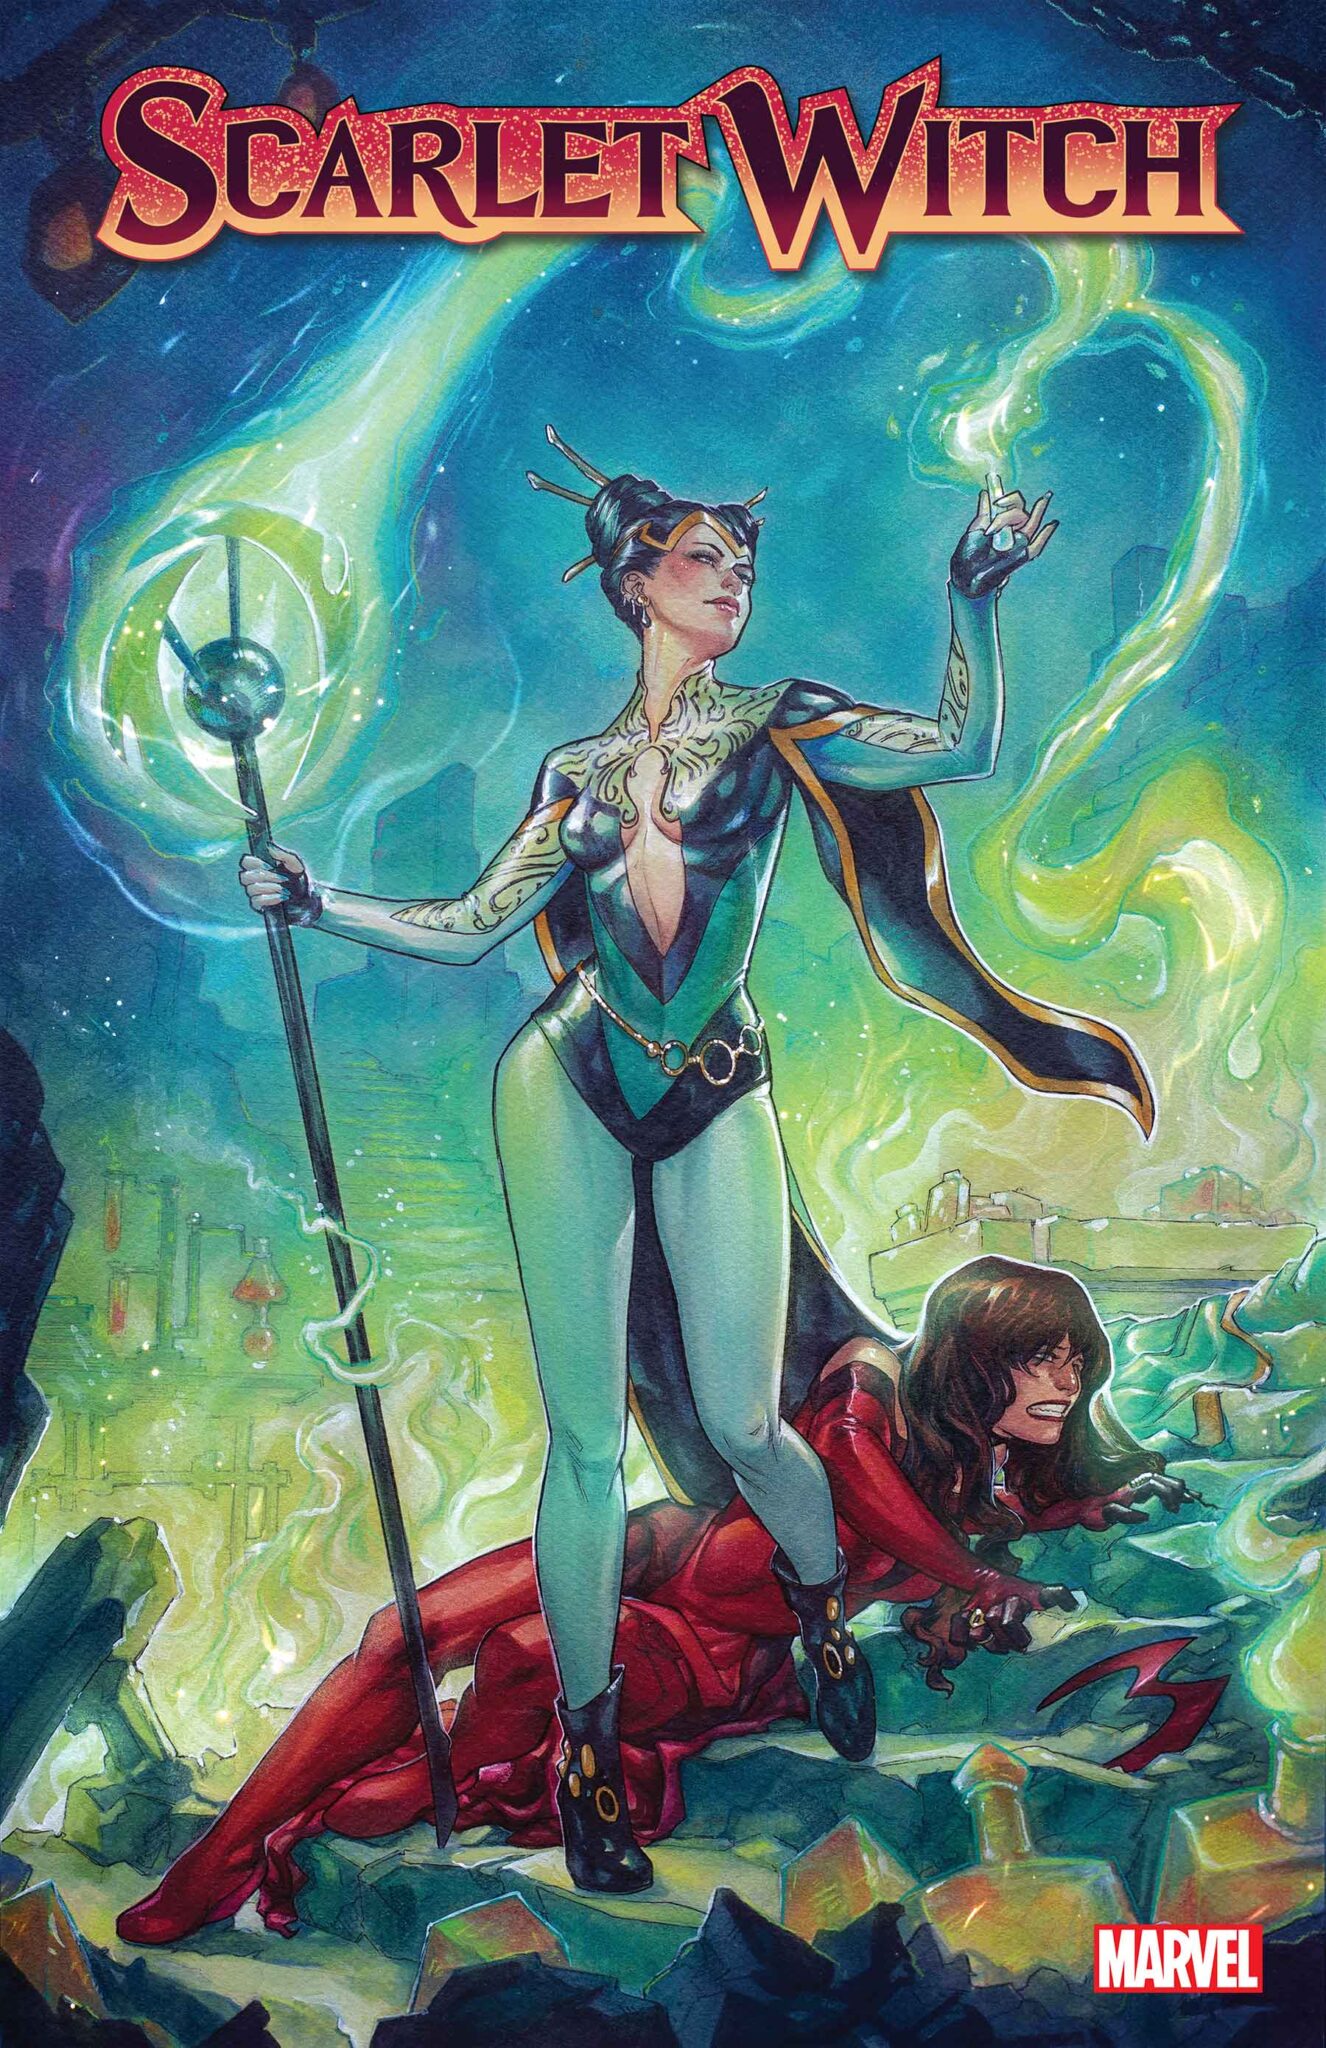 Scarlet Witch #7 cover variant by Meghan Hetrick